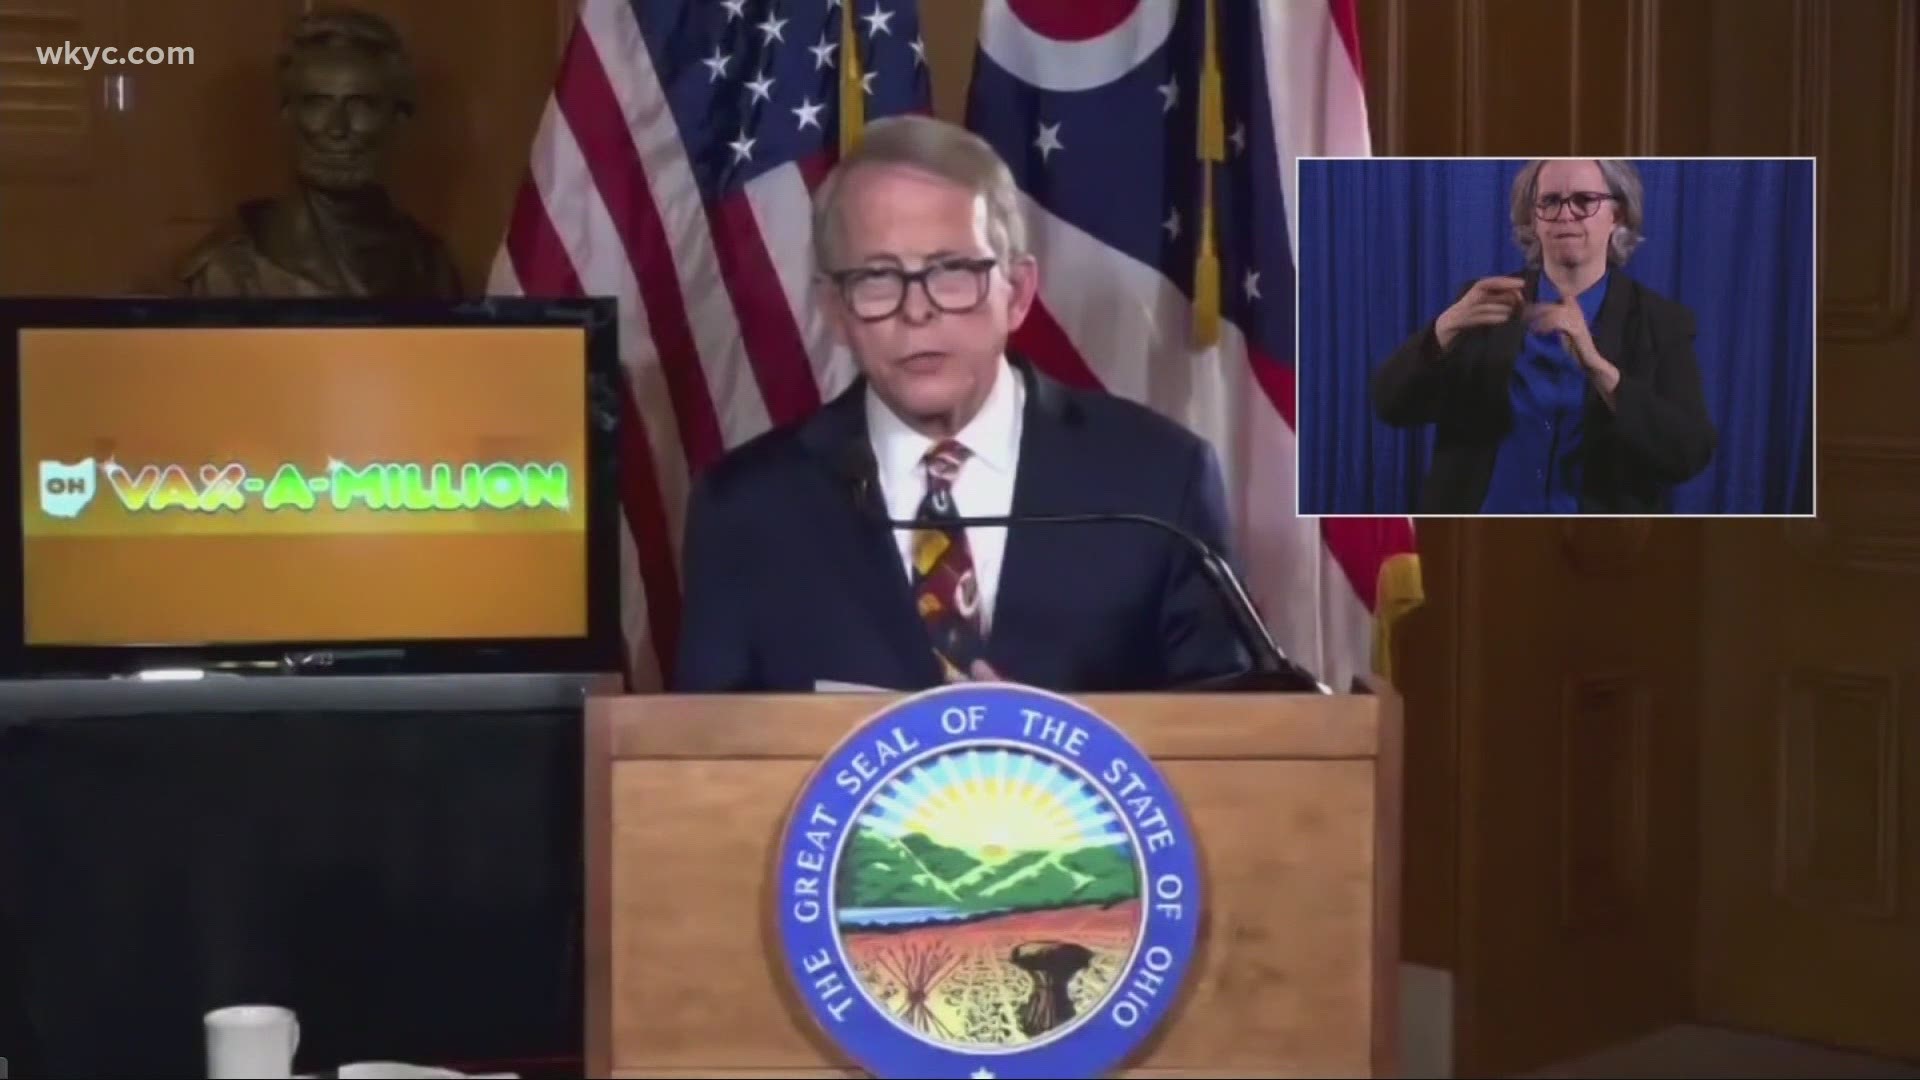 For the first time since March 2020, Ohio has ended its COVID state of emergency. Gov. Mike DeWine announced the news during a Thursday press conference.